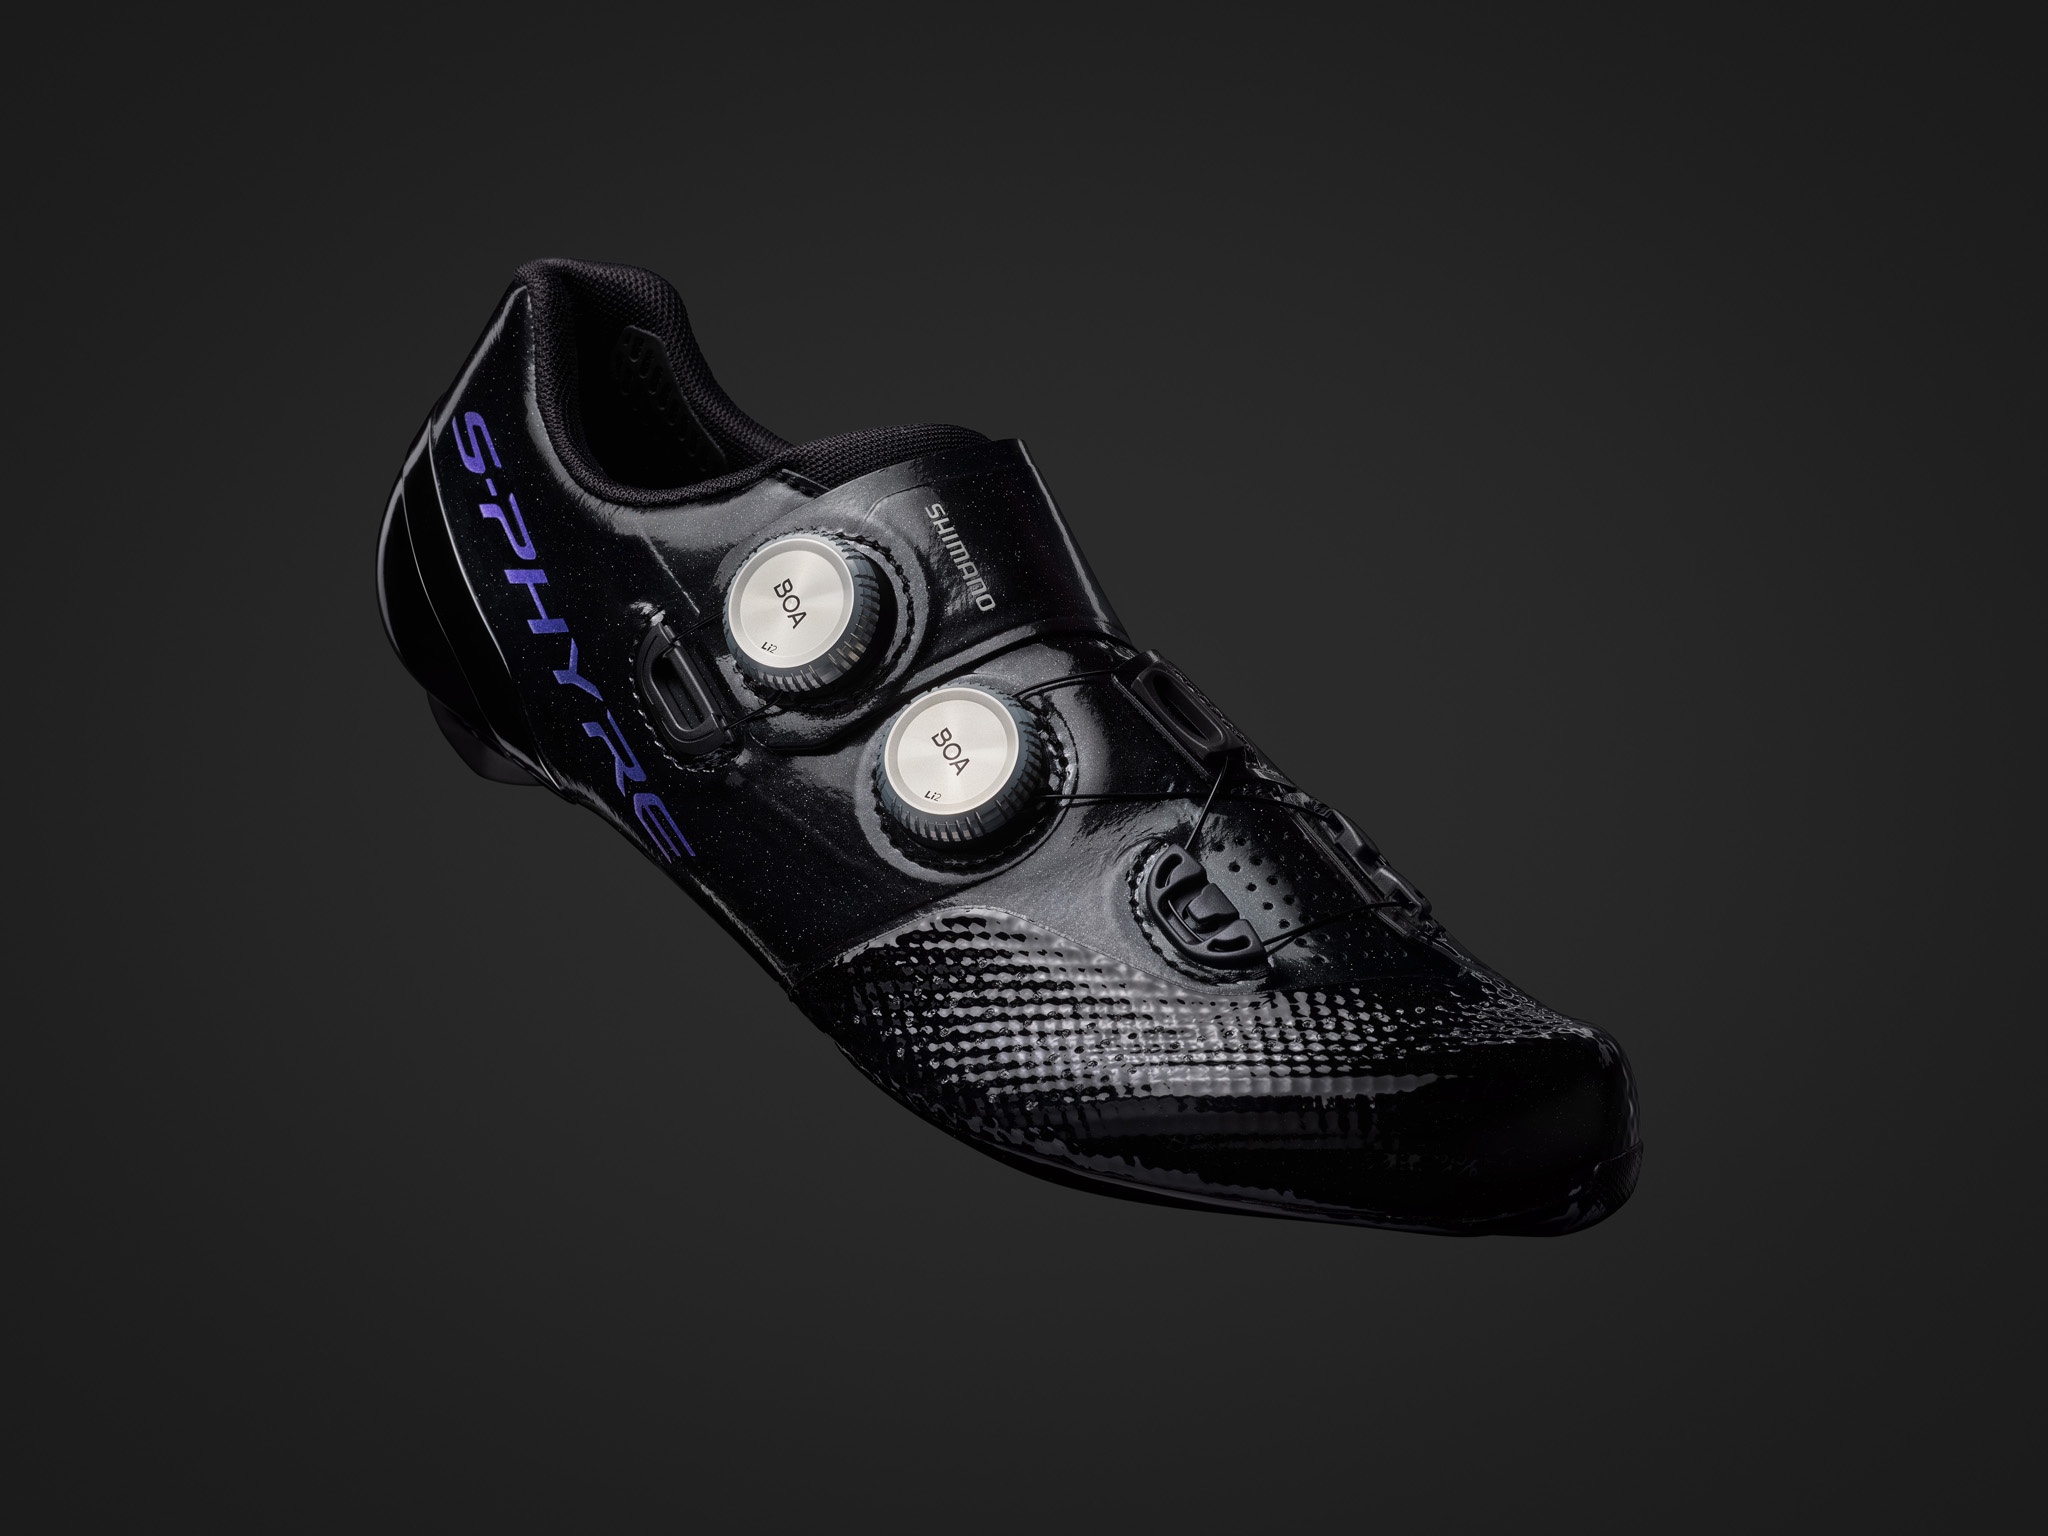 Shimano release latest shoes designed for road, gravel and track